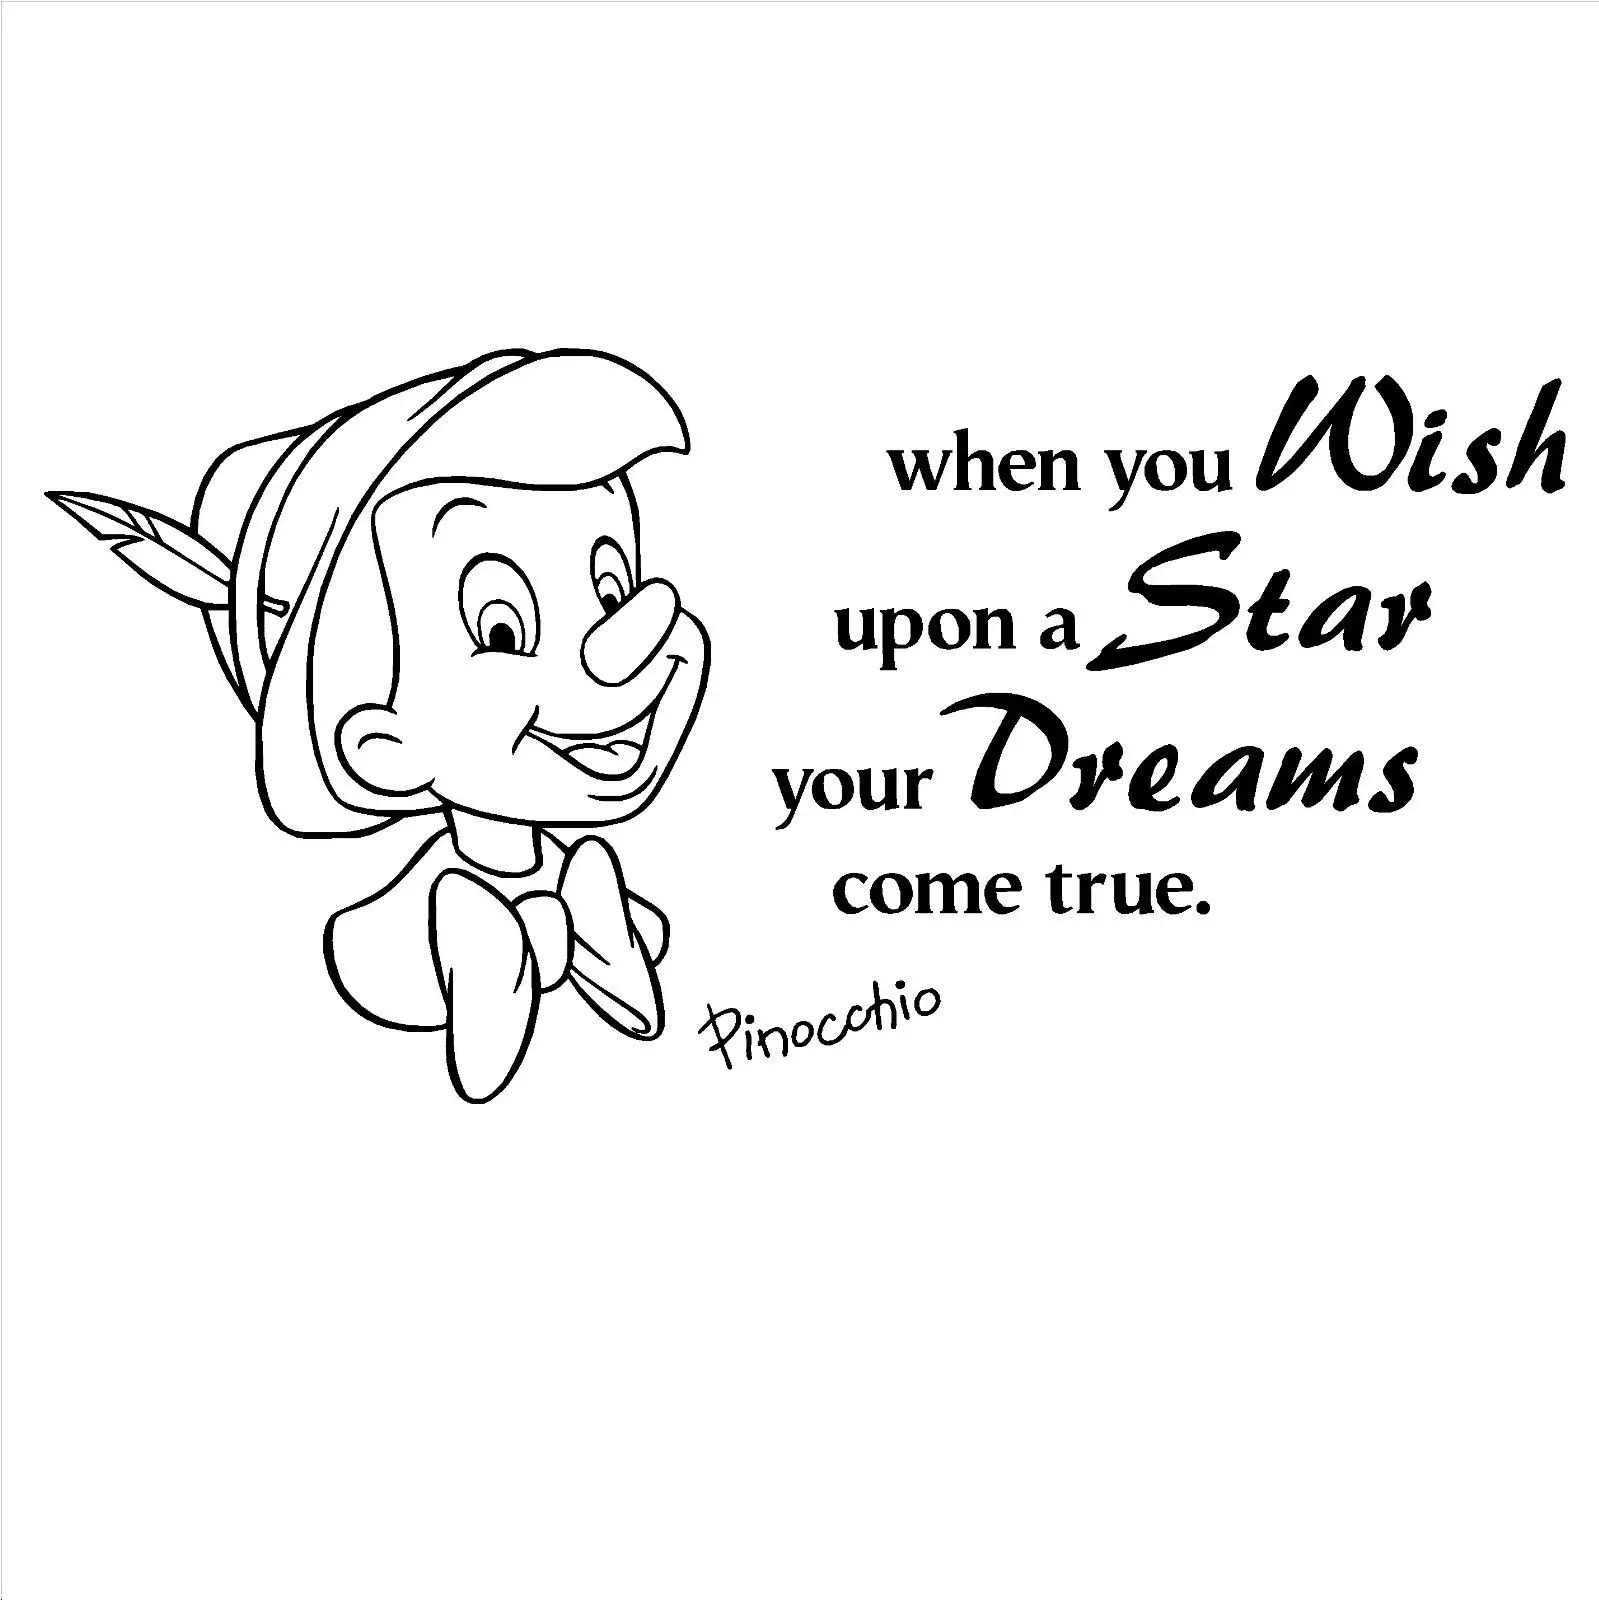 HWHD-os1688-PINOCCHIO-when-you-wish-upon-a-star-nursery-vinyl-wall-art-sticker-quote-free.jpg